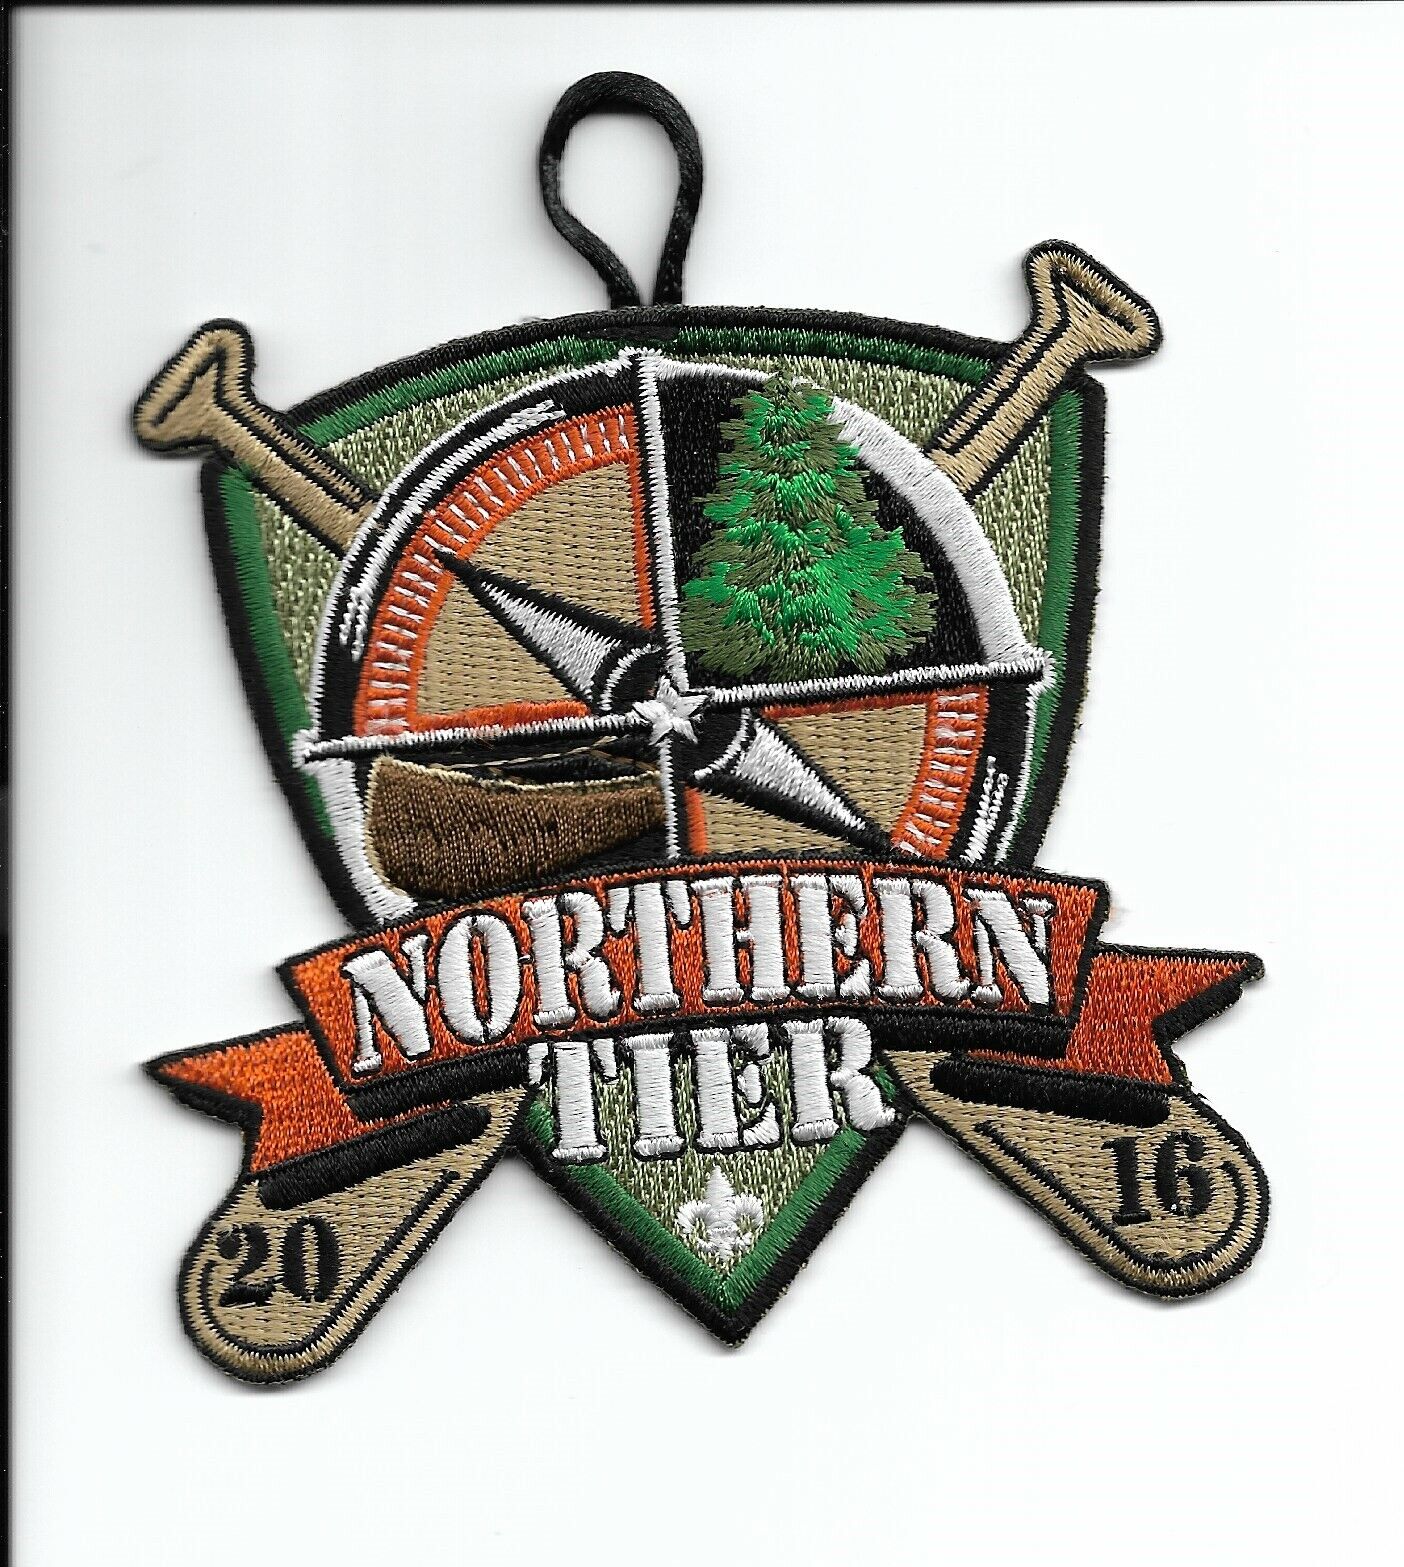 NORTHERN TIER HIGH ADVENTURE BASE * 2016 DATED PATCH 